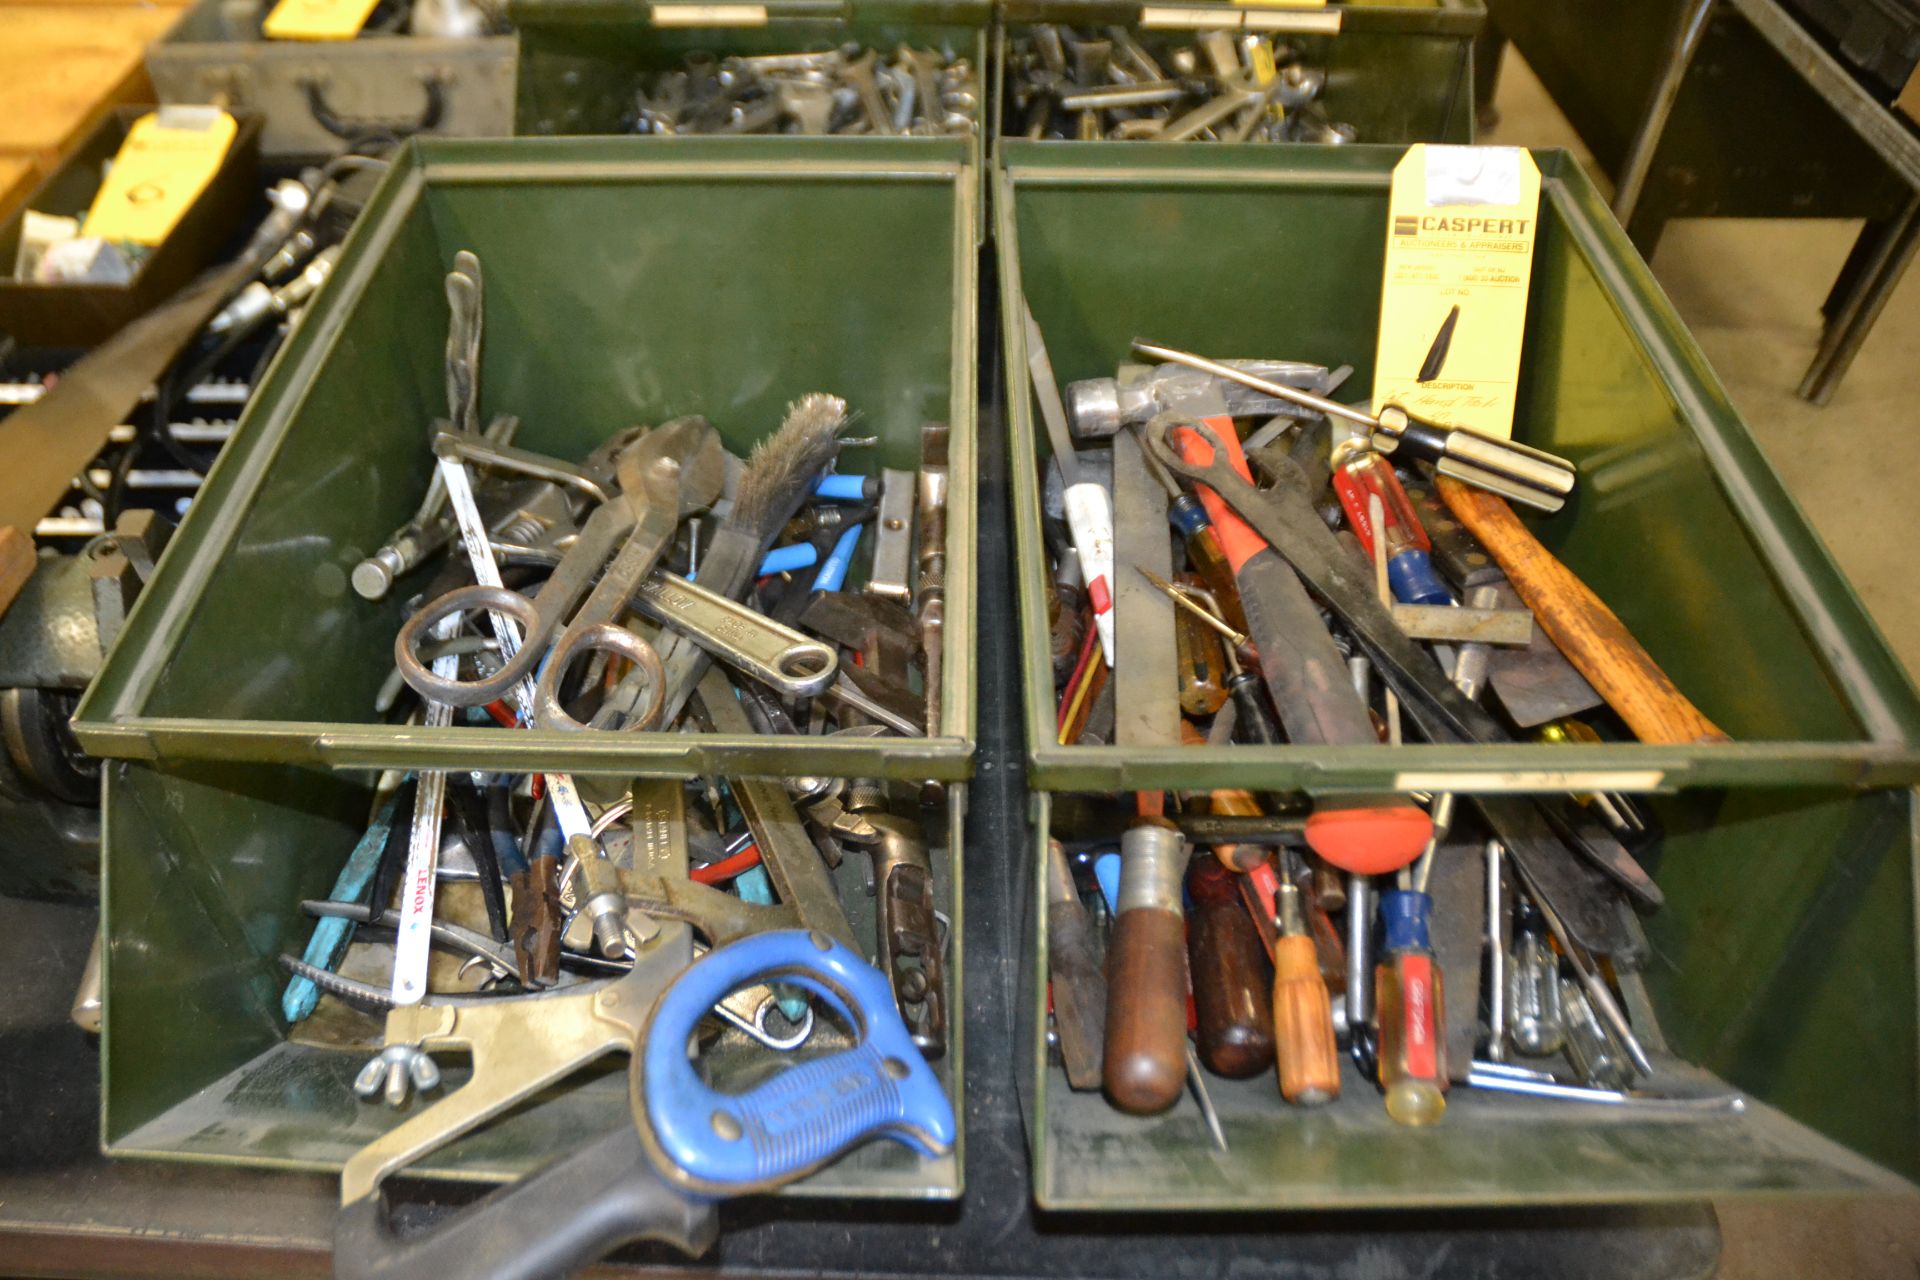 LOT - Hand Tools in (2) Bins (No Bins Included)